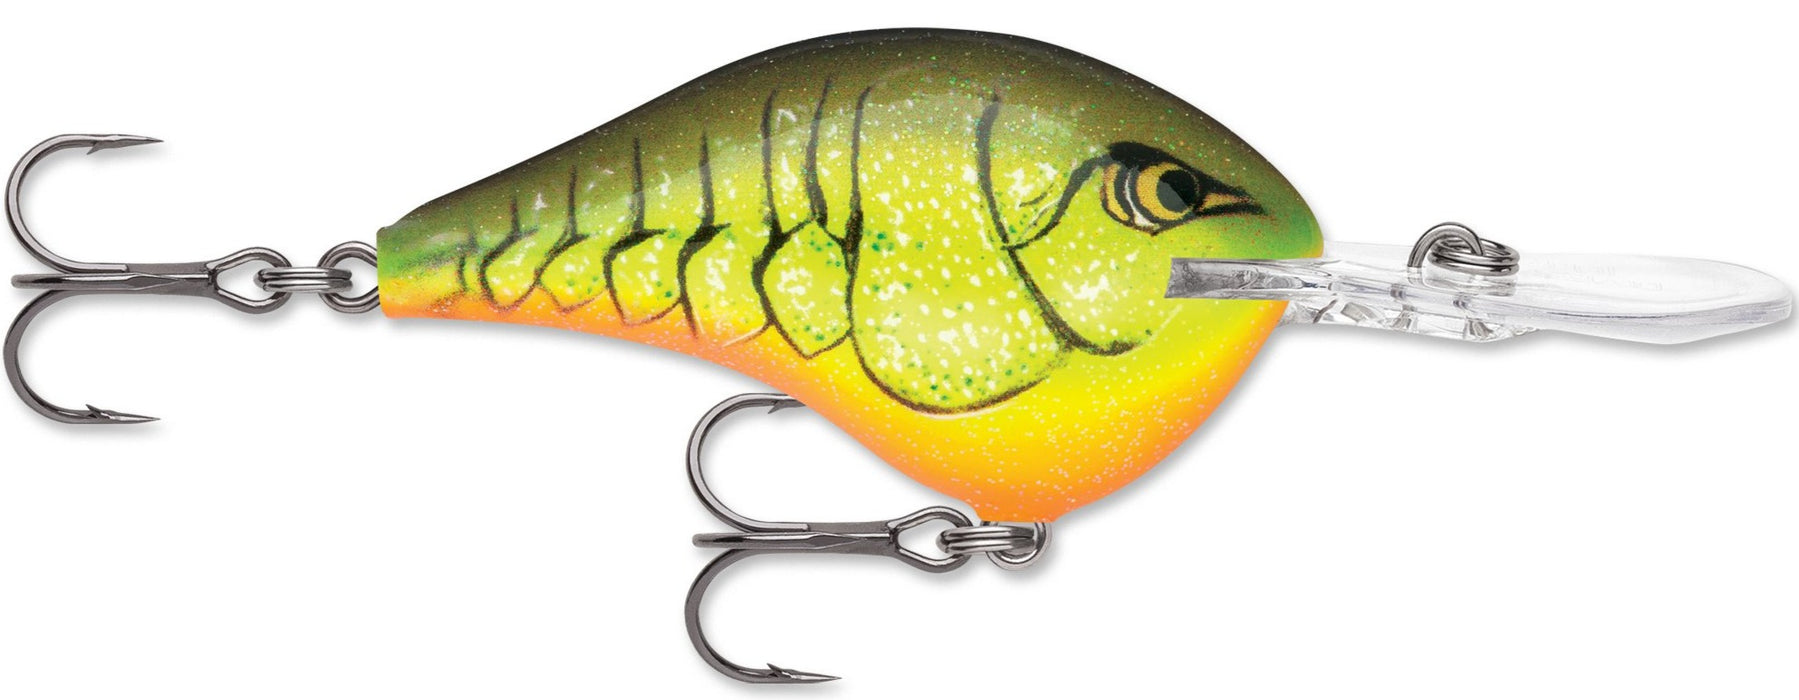 Rapala DT (Dives-To) Series Firetiger